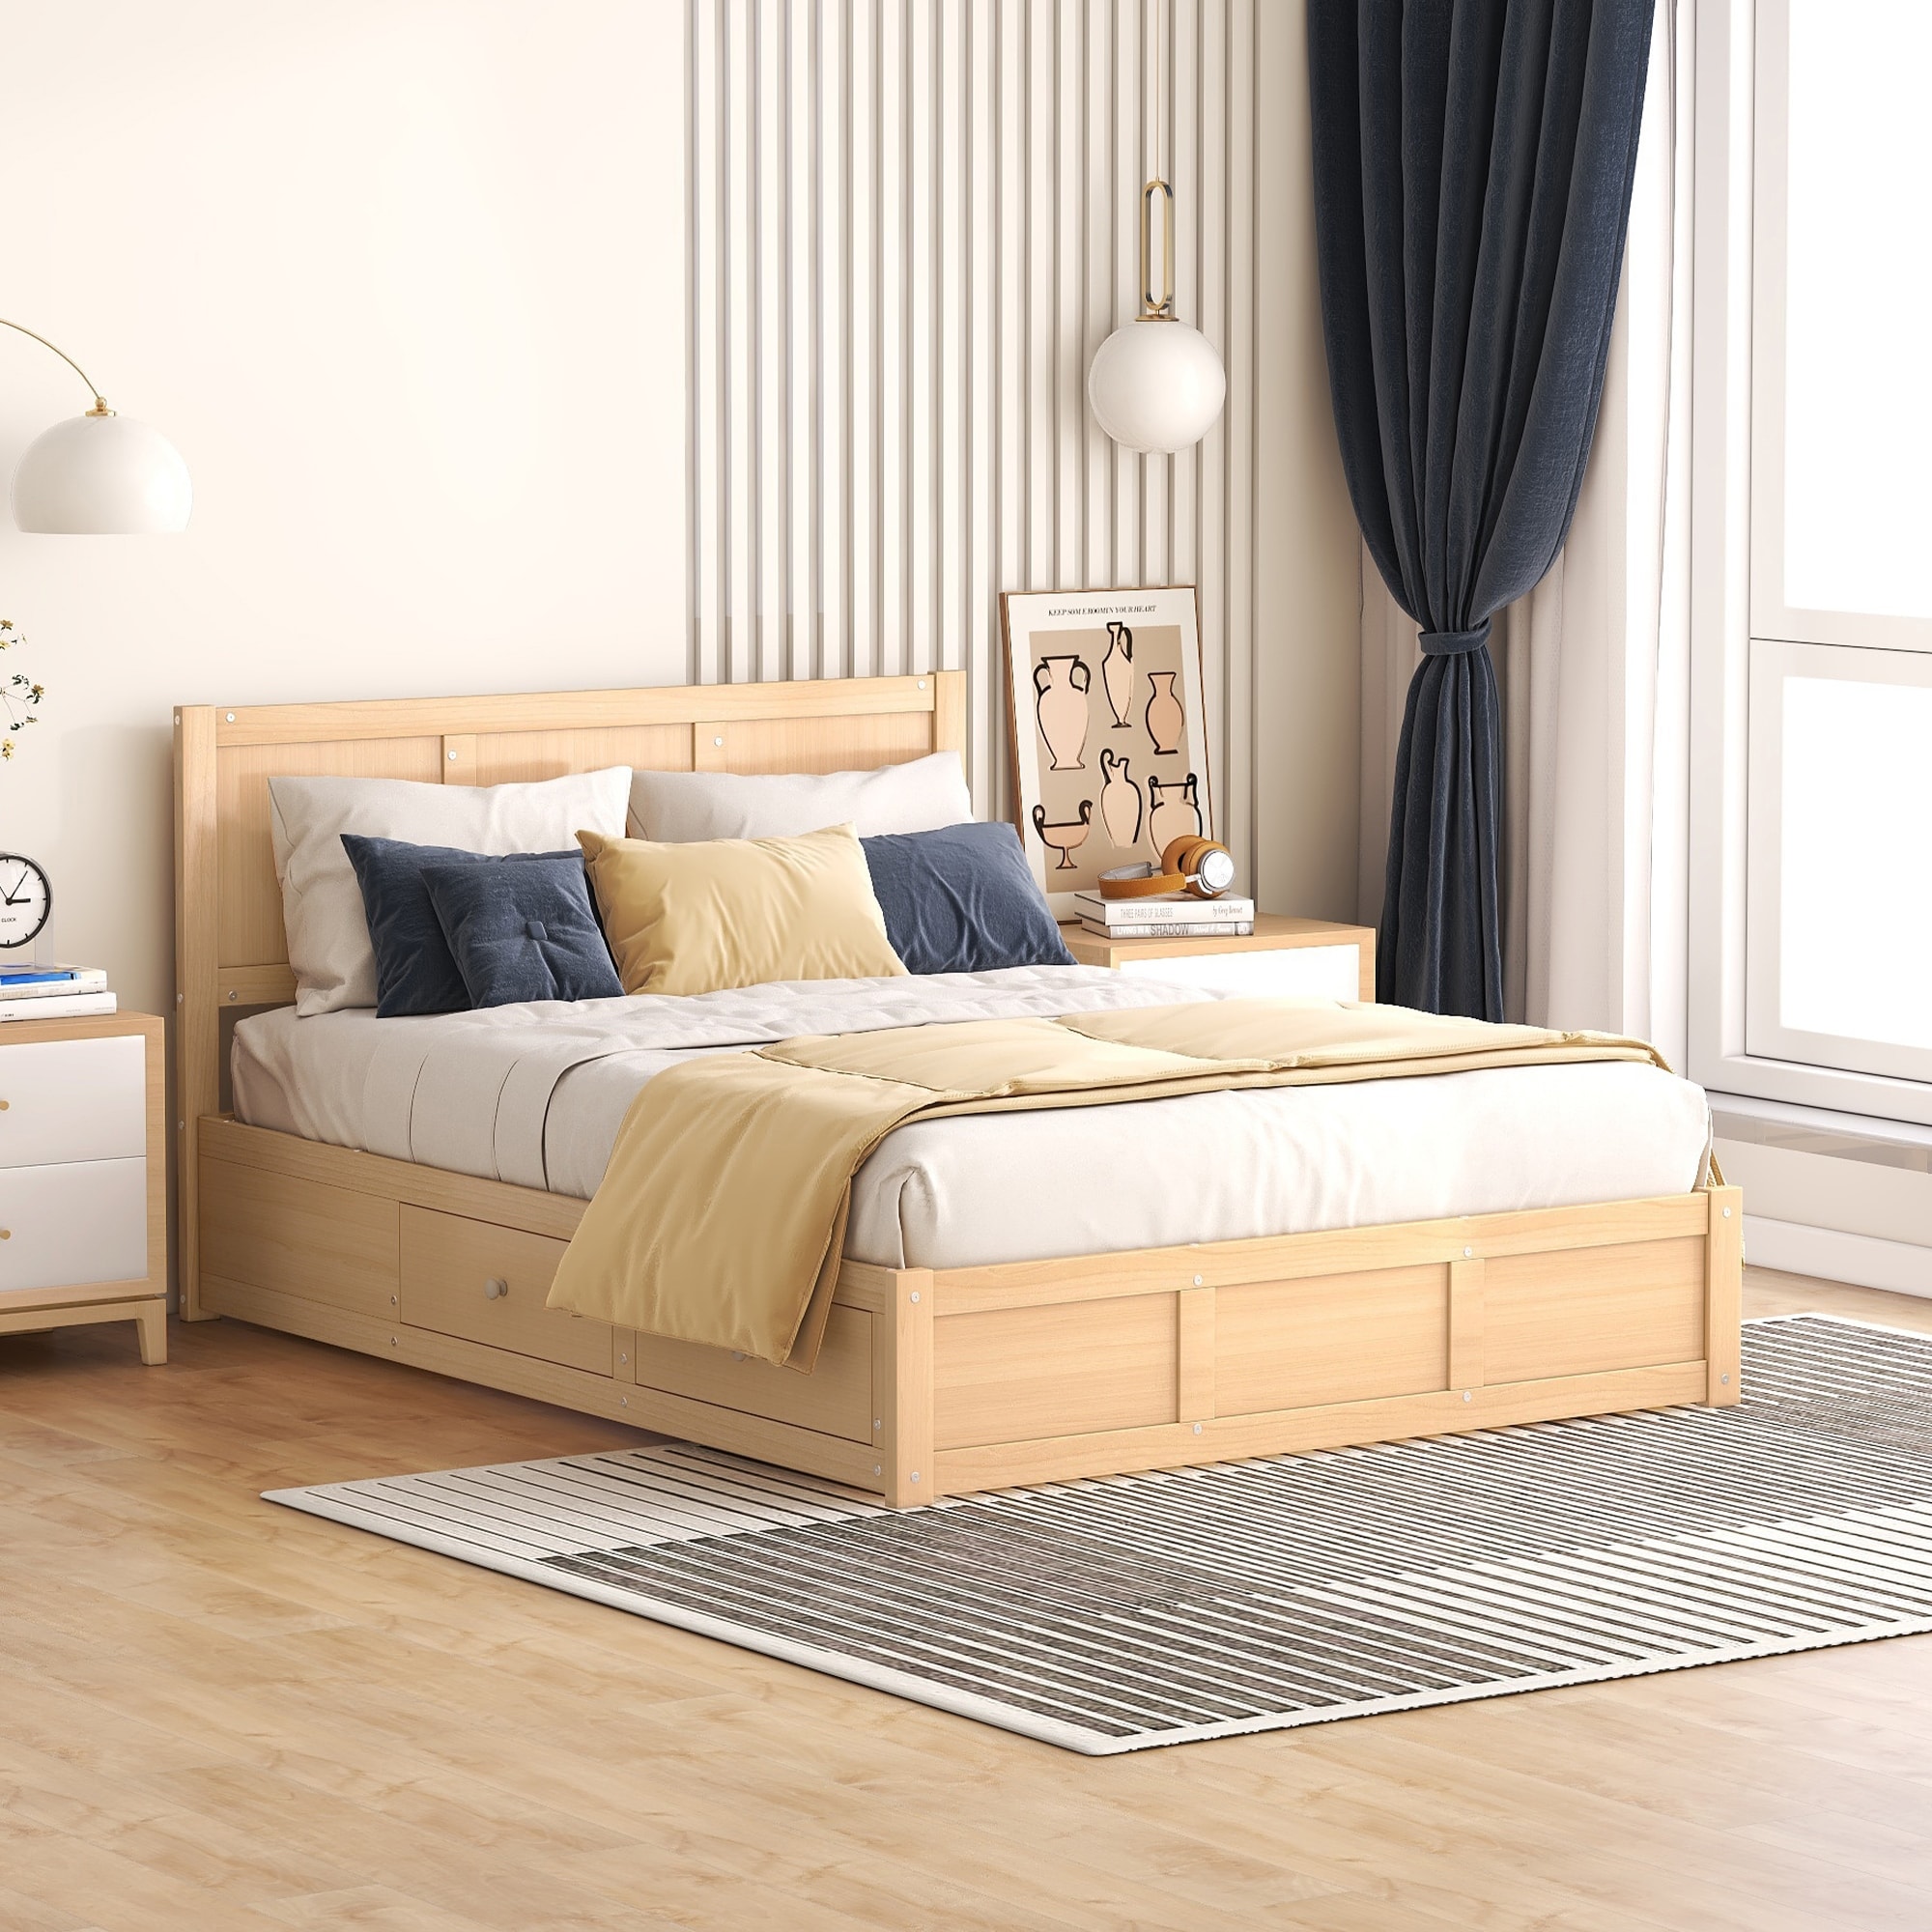 Full Size Wood Storage Platform Bed with Underneath Storage Space, 2 Drawers, Bed with Wood Headboard and Wood Slats